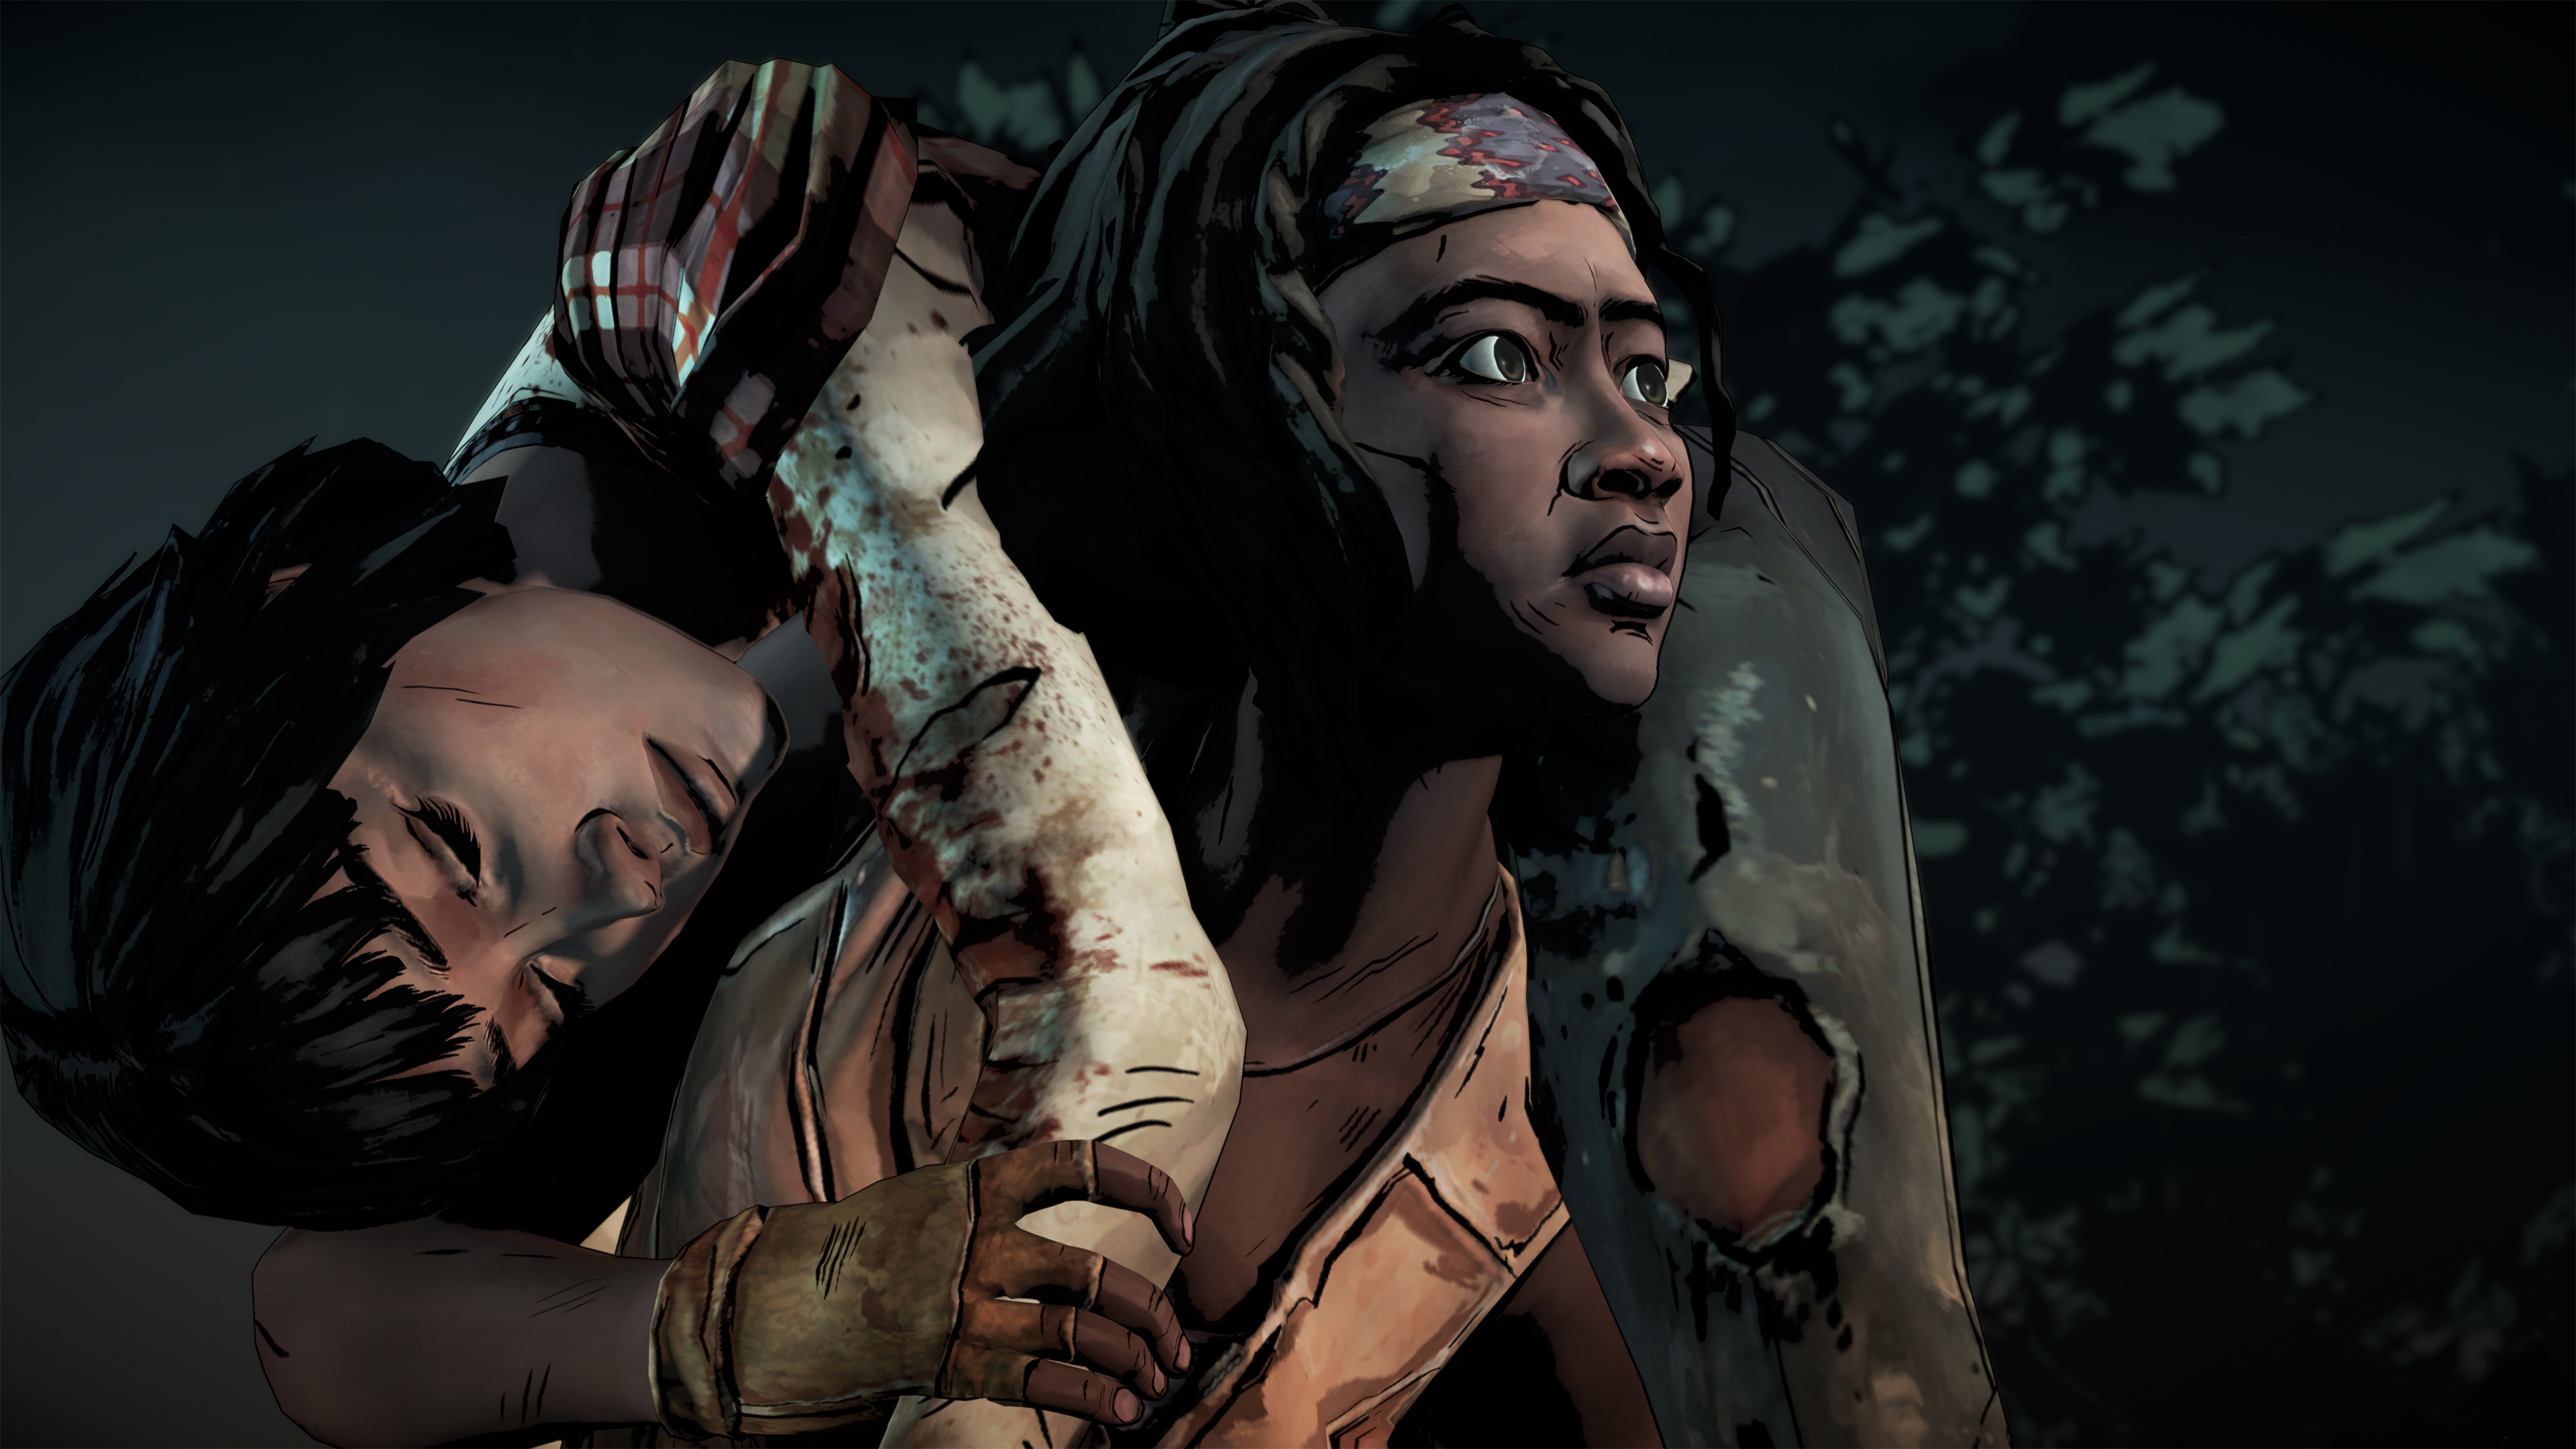 1920x1080 The Walking Dead The Telltale 1080p Laptop Full Hd Wallpaper Hd Games 4k Wallpapers Images Photos And Background